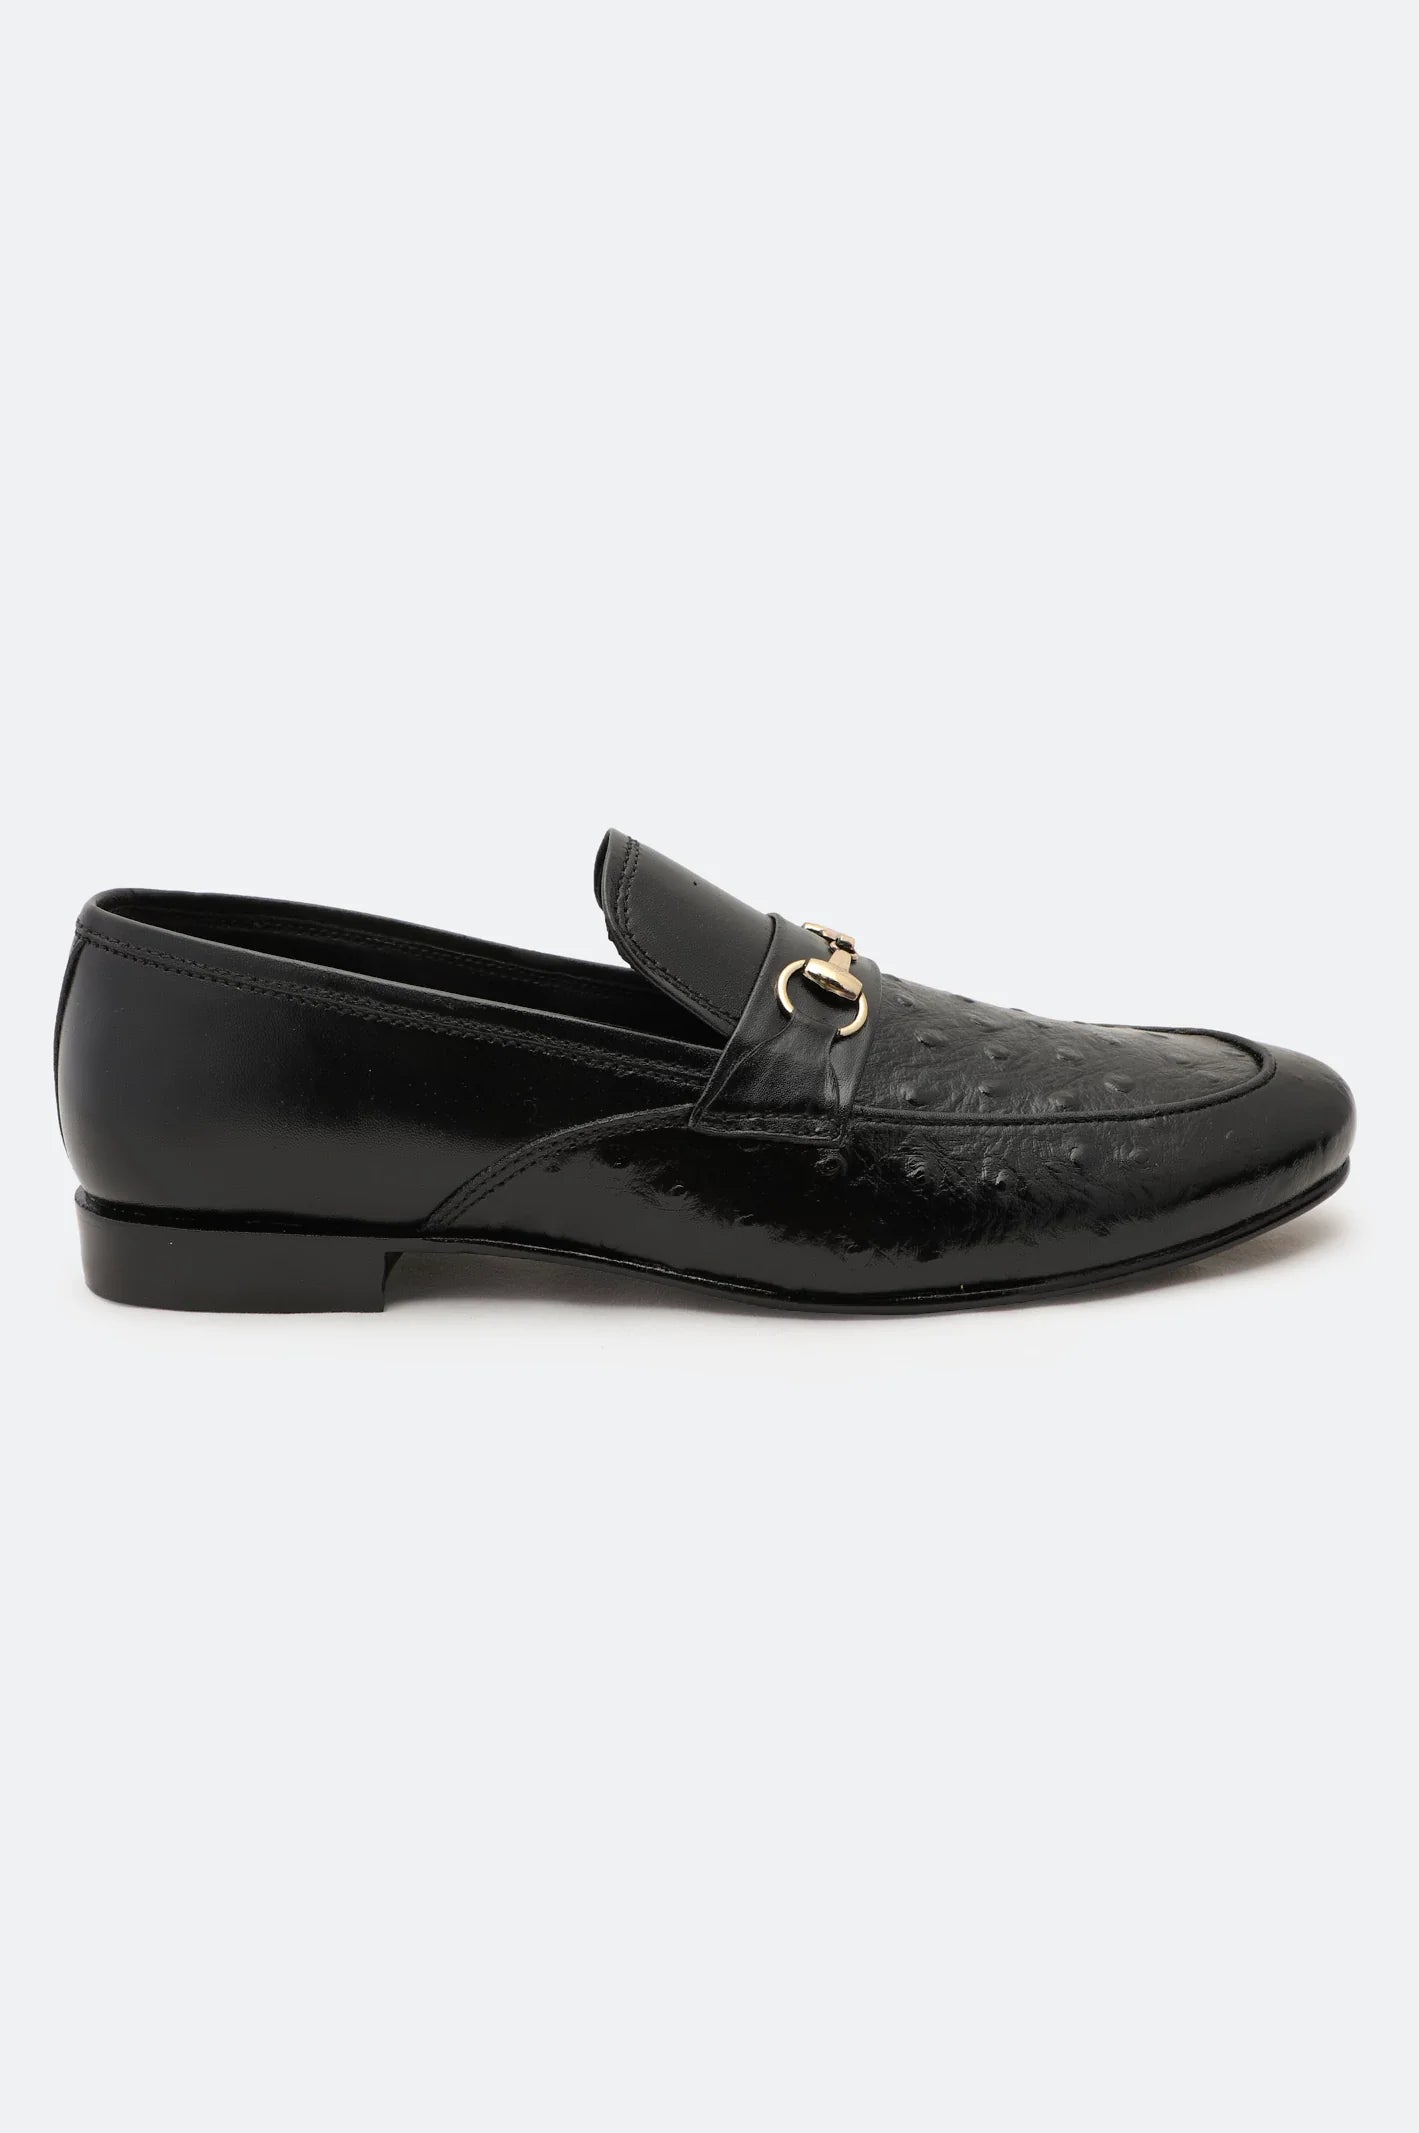 Black Moccasins Formal Shoes From French Emporio By Diners